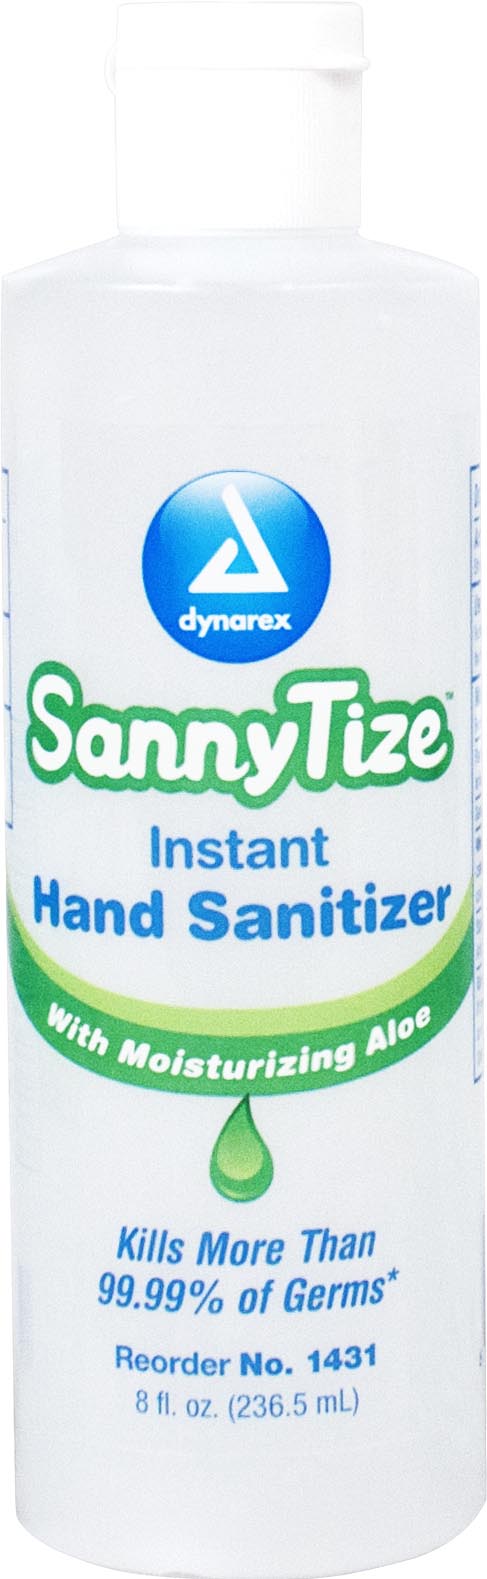 1431  Dynarex Sannytize Instant Hand Sanitizer contains 62% Ethyl Alcohol and come packed in a 8-ounce bottle